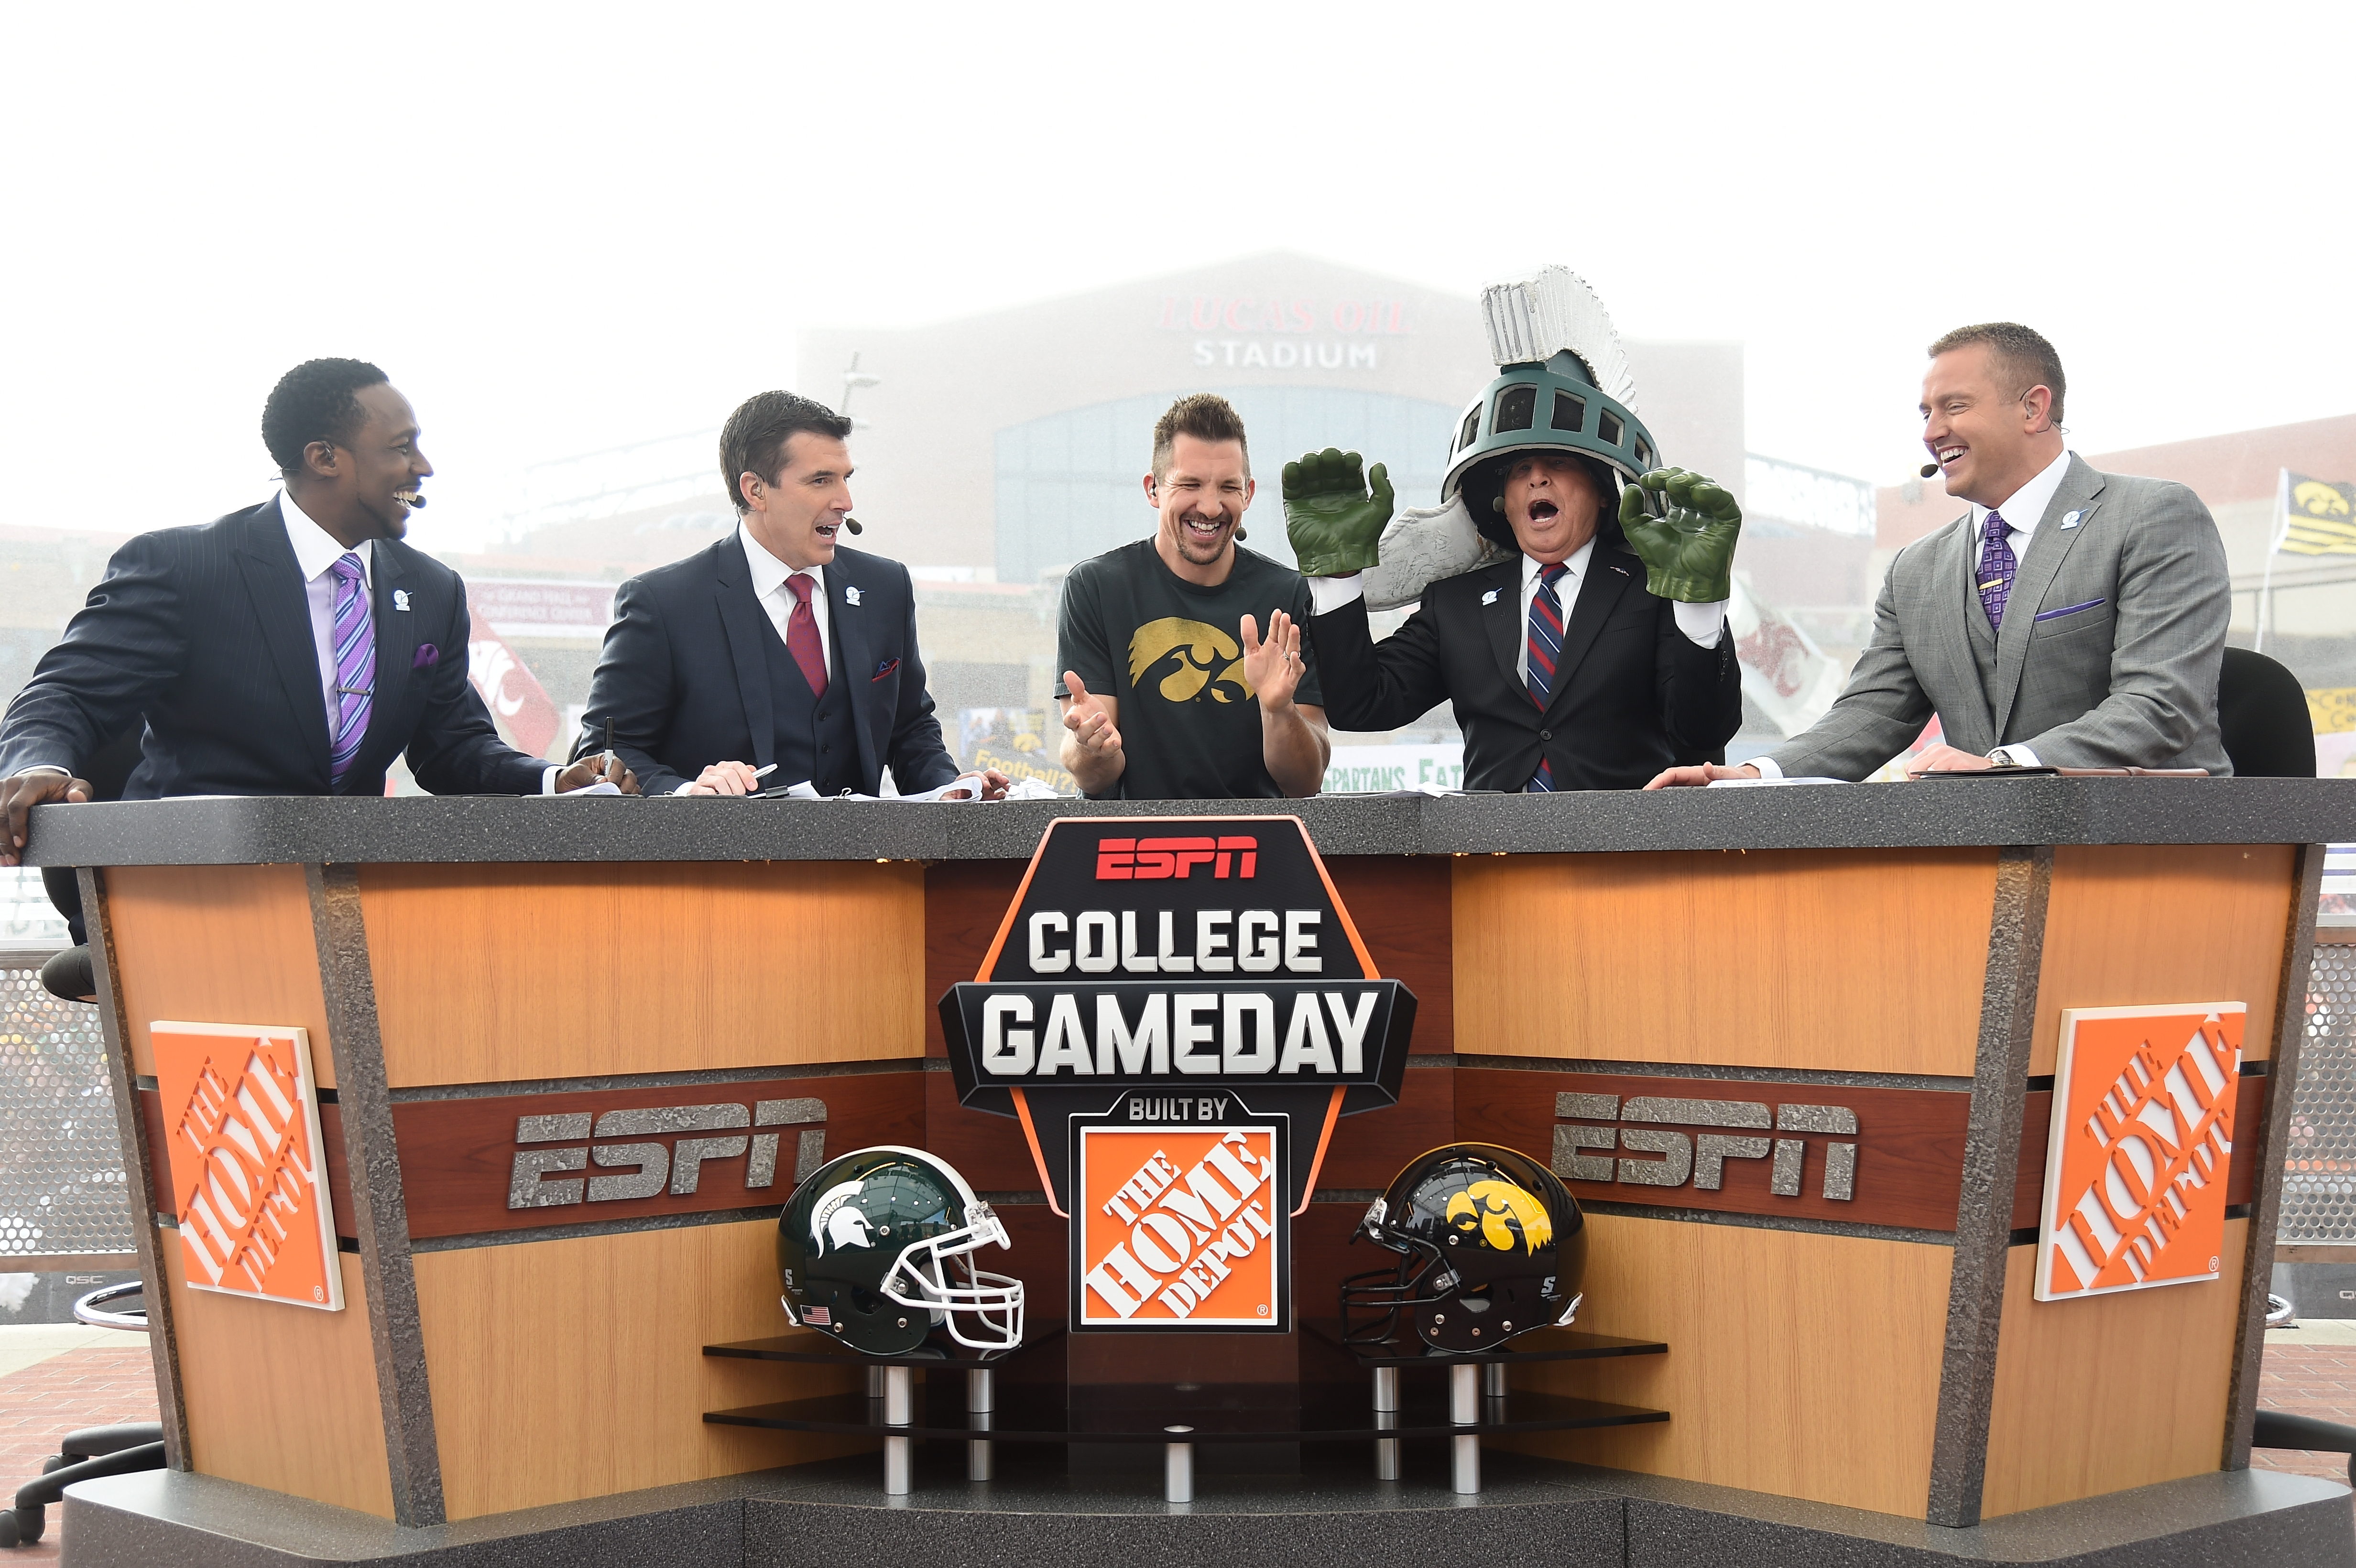 Desmond Howard, Rece Davis, Dallas Clark, Lee Corso and Kirk Herbstreit on the set of College GameDay Built by the Home Depot during coverage of the 2015 Big Ten Championship game (Photo by Scott Clarke / ESPN Images)